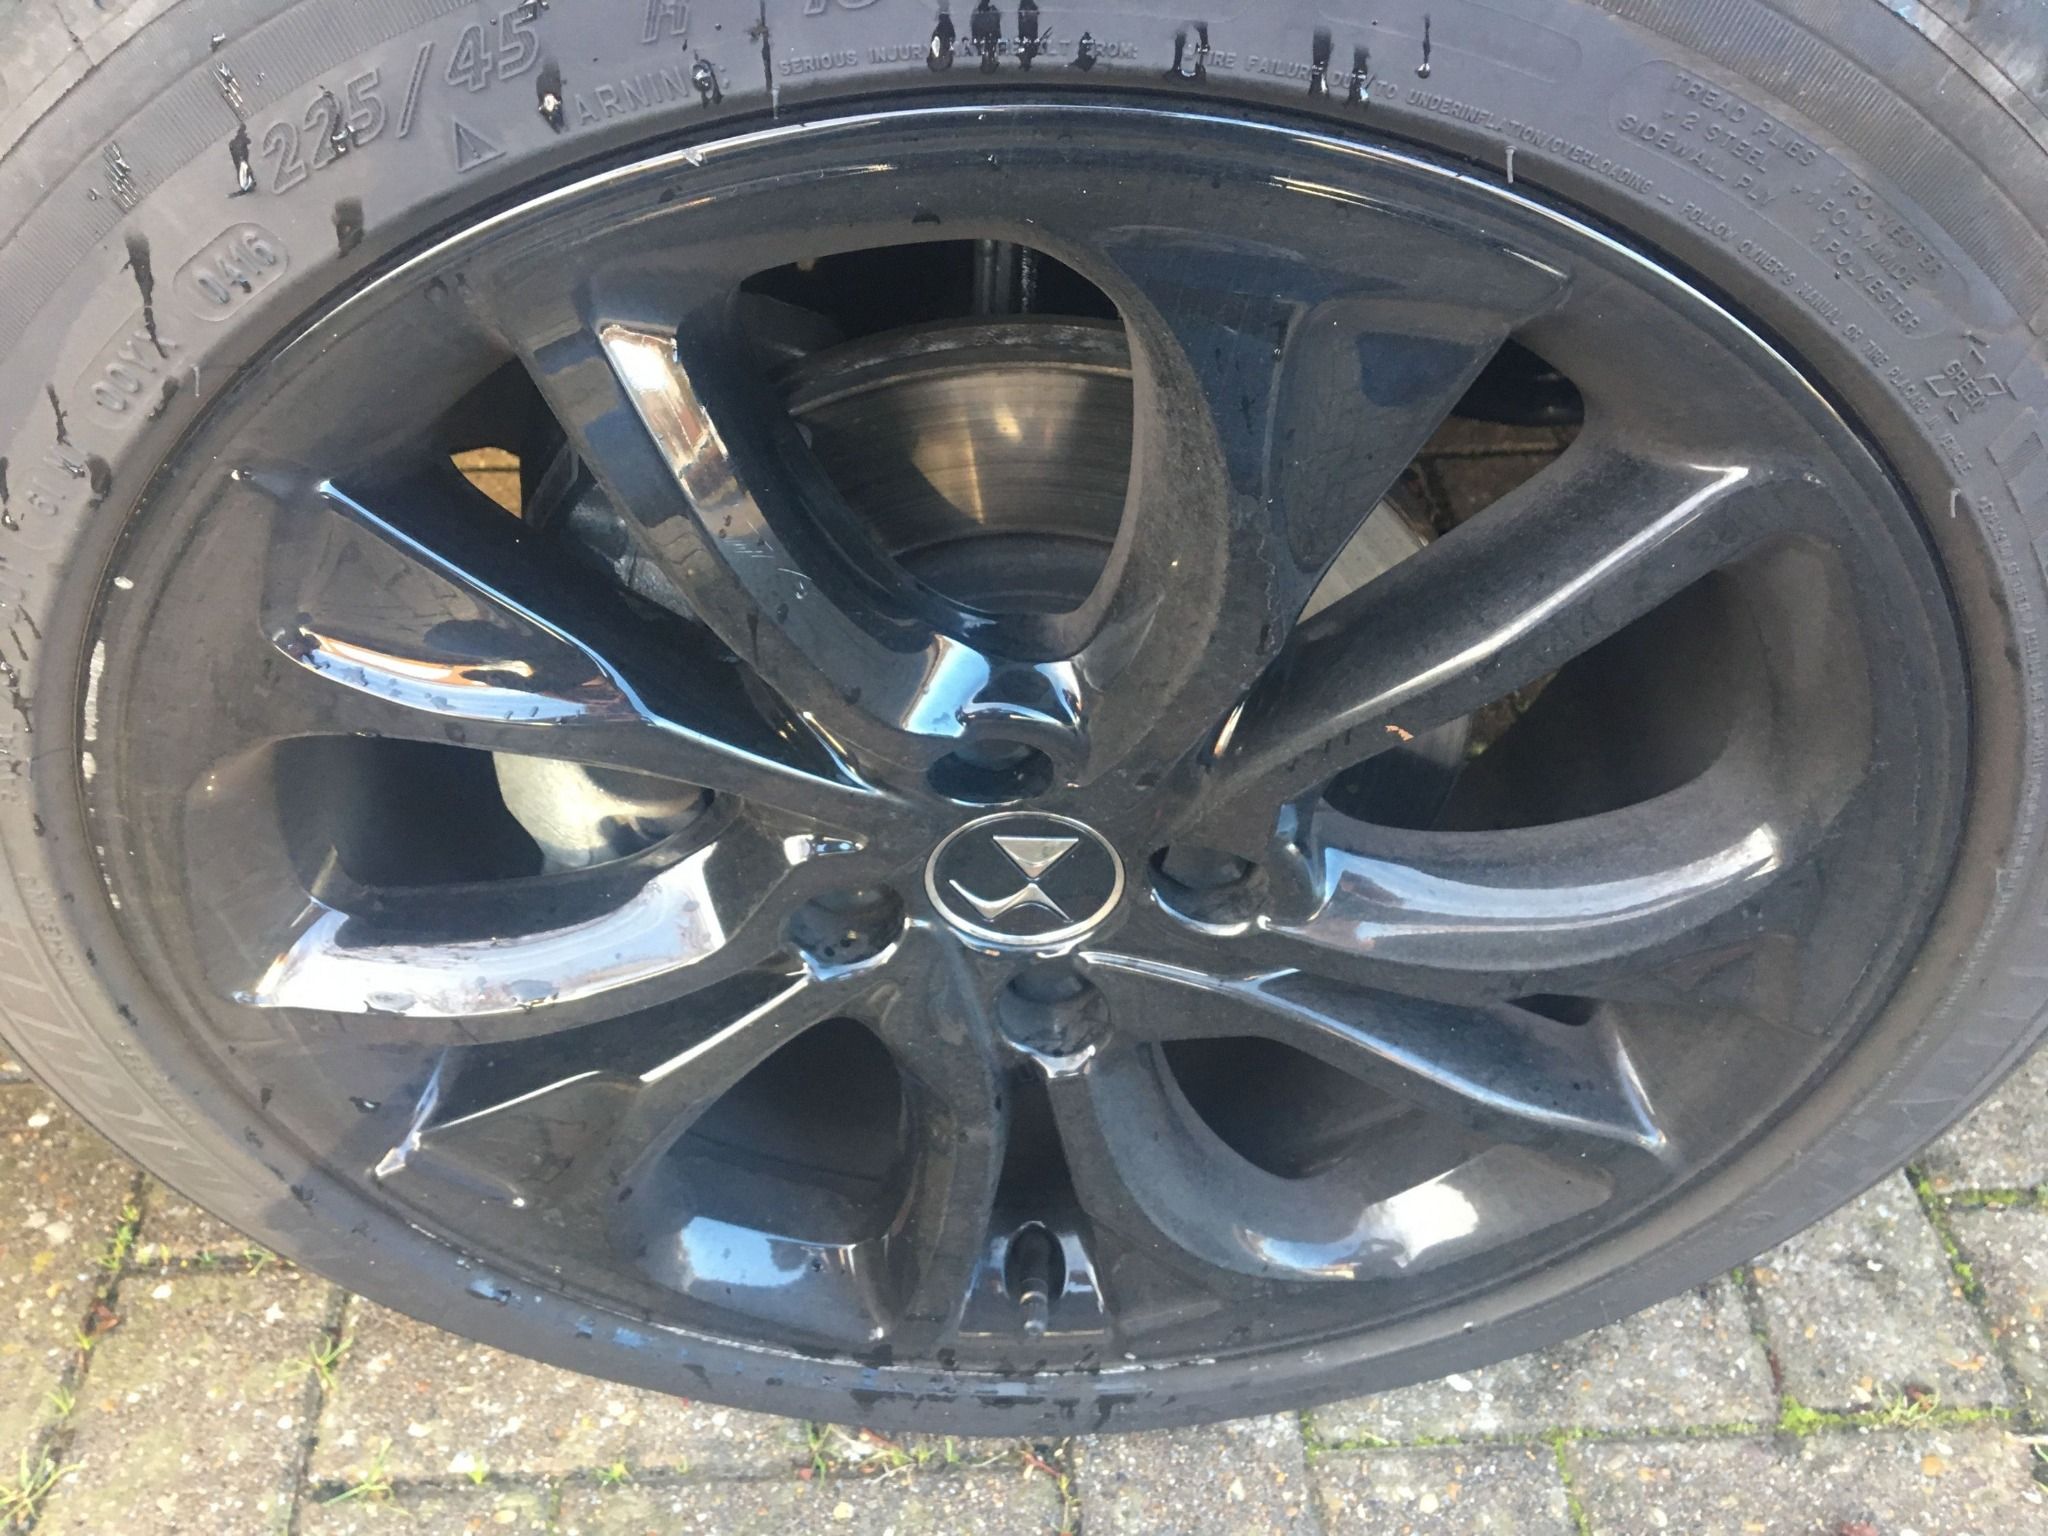 Kerbed an alloy wheel? Here's how to fix it image